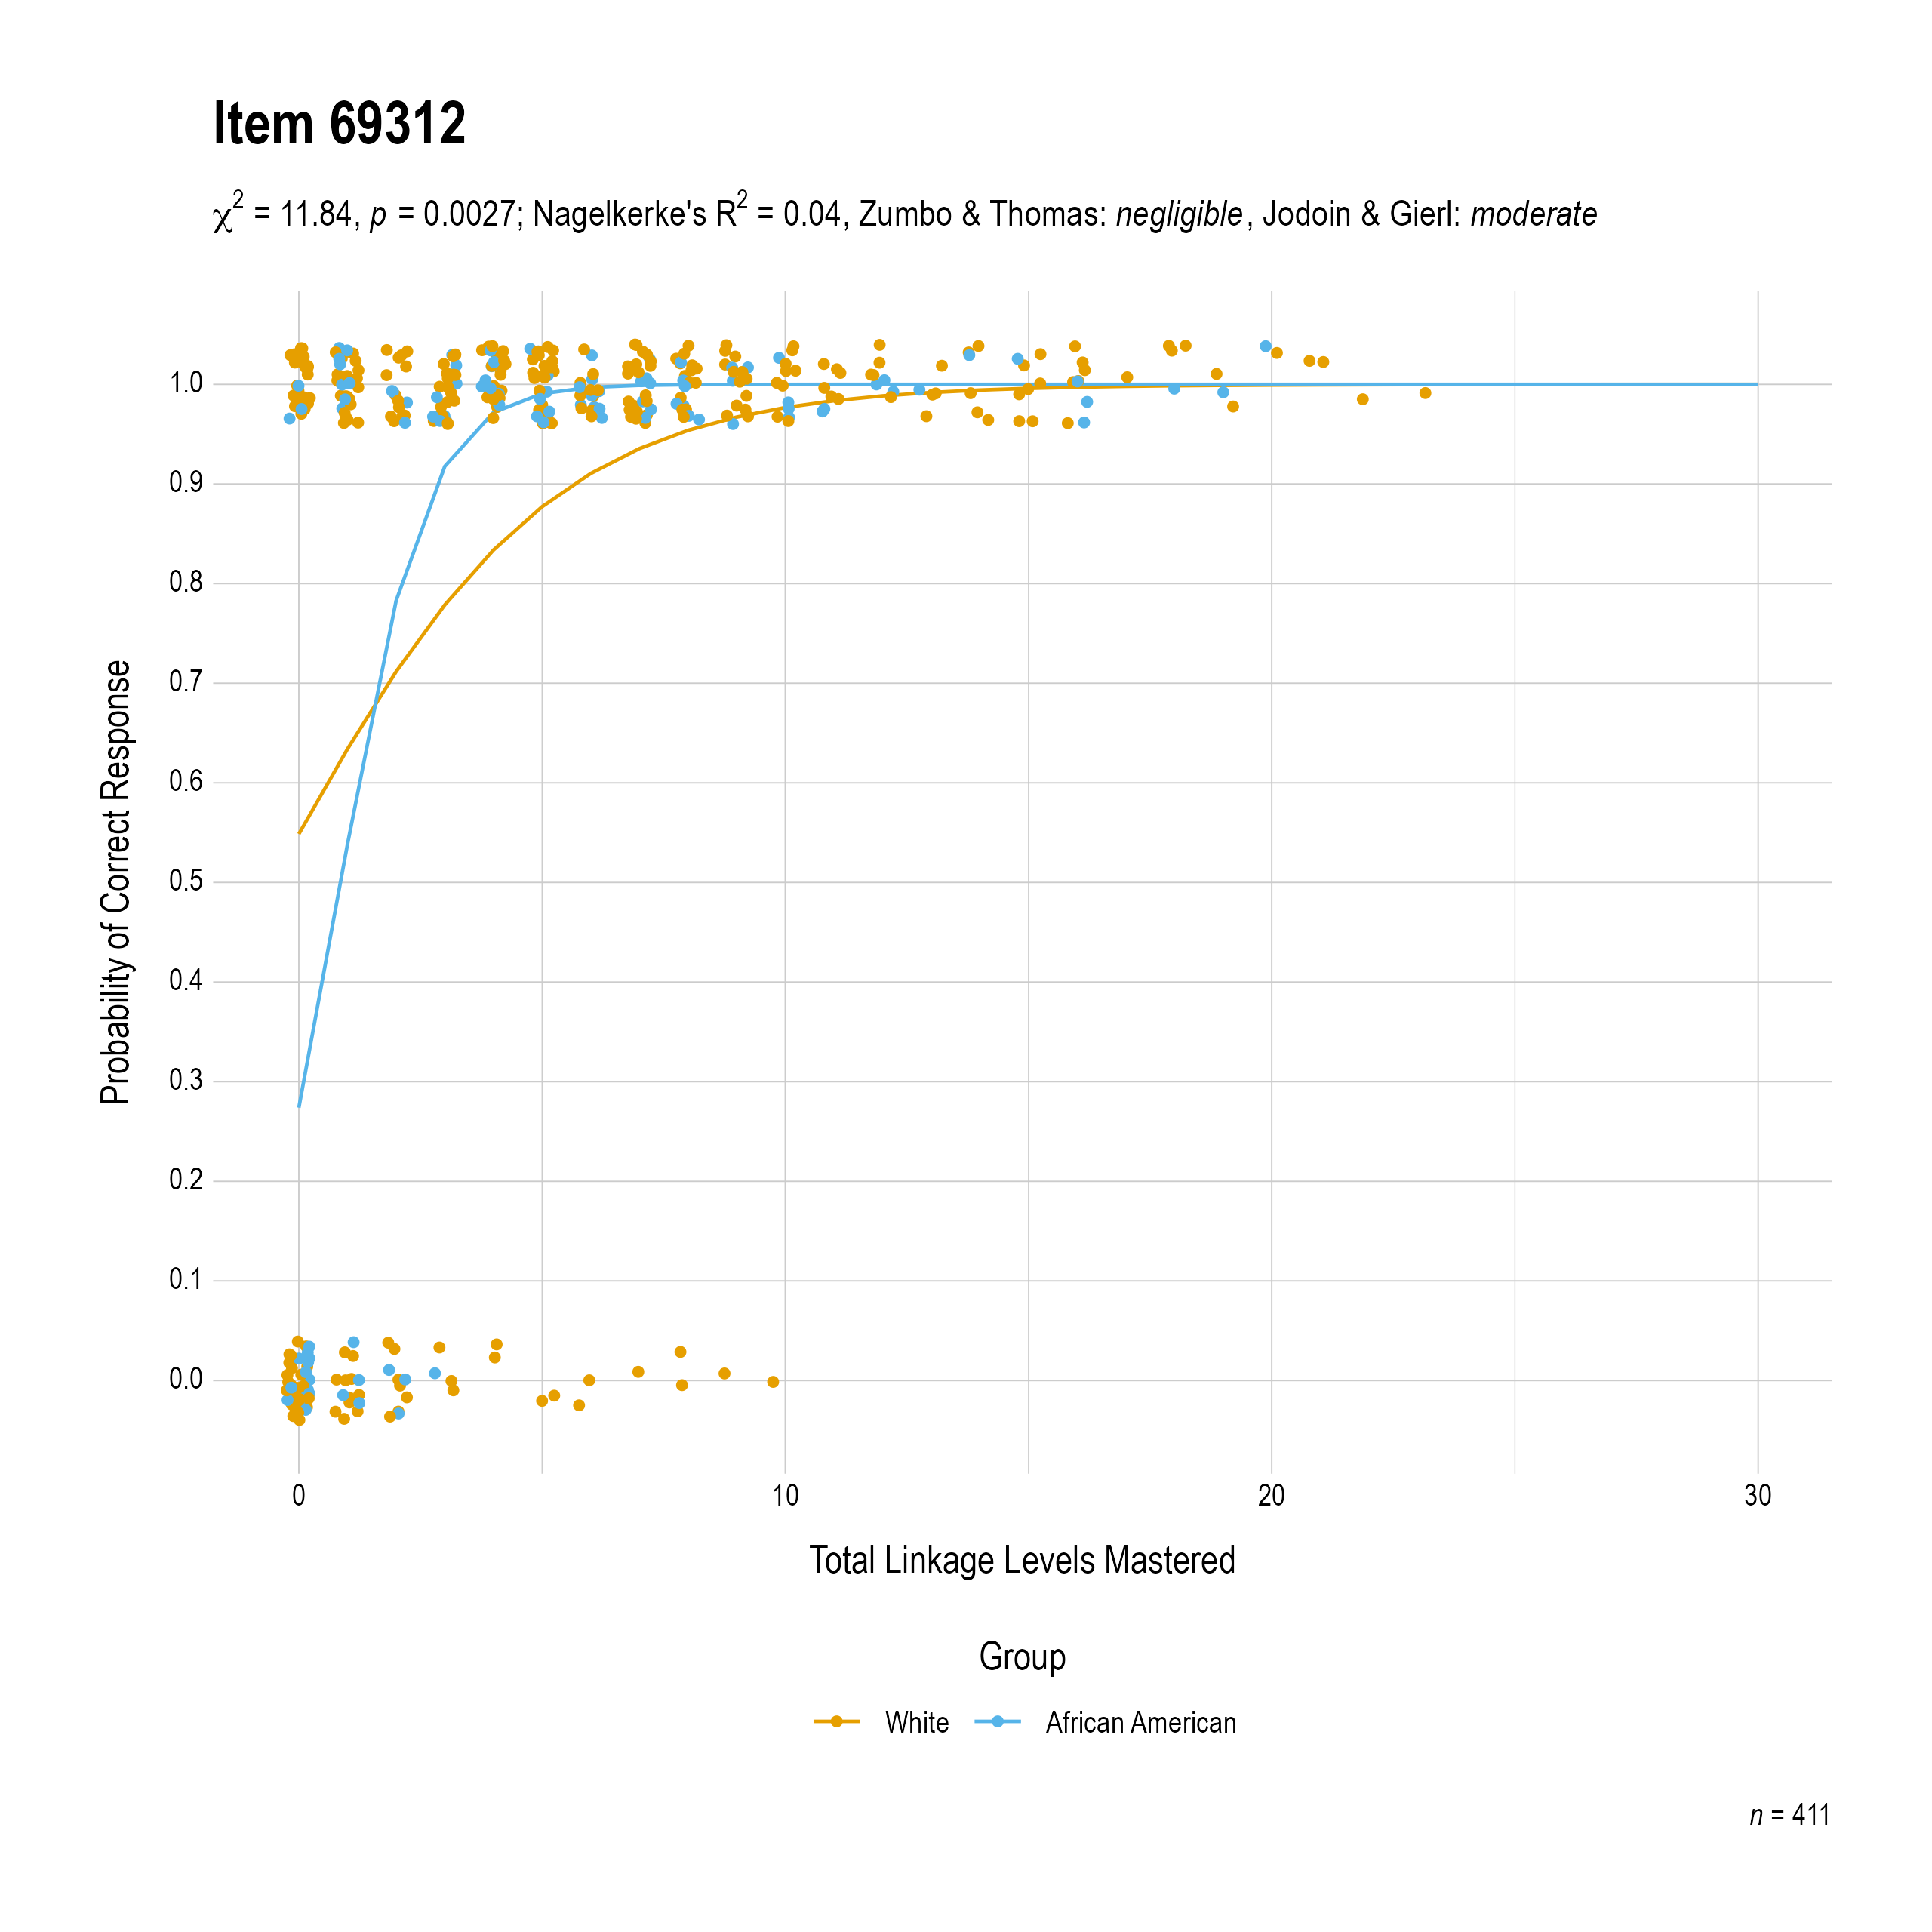 The plot of the combined race differential item function evidence for Mathematics item 69312. The figure contains points shaded by group. The figure also contains a logistic regression curve for each group. The total linkage levels mastered in is on the x-axis, and the probability of a correct response is on the y-axis.